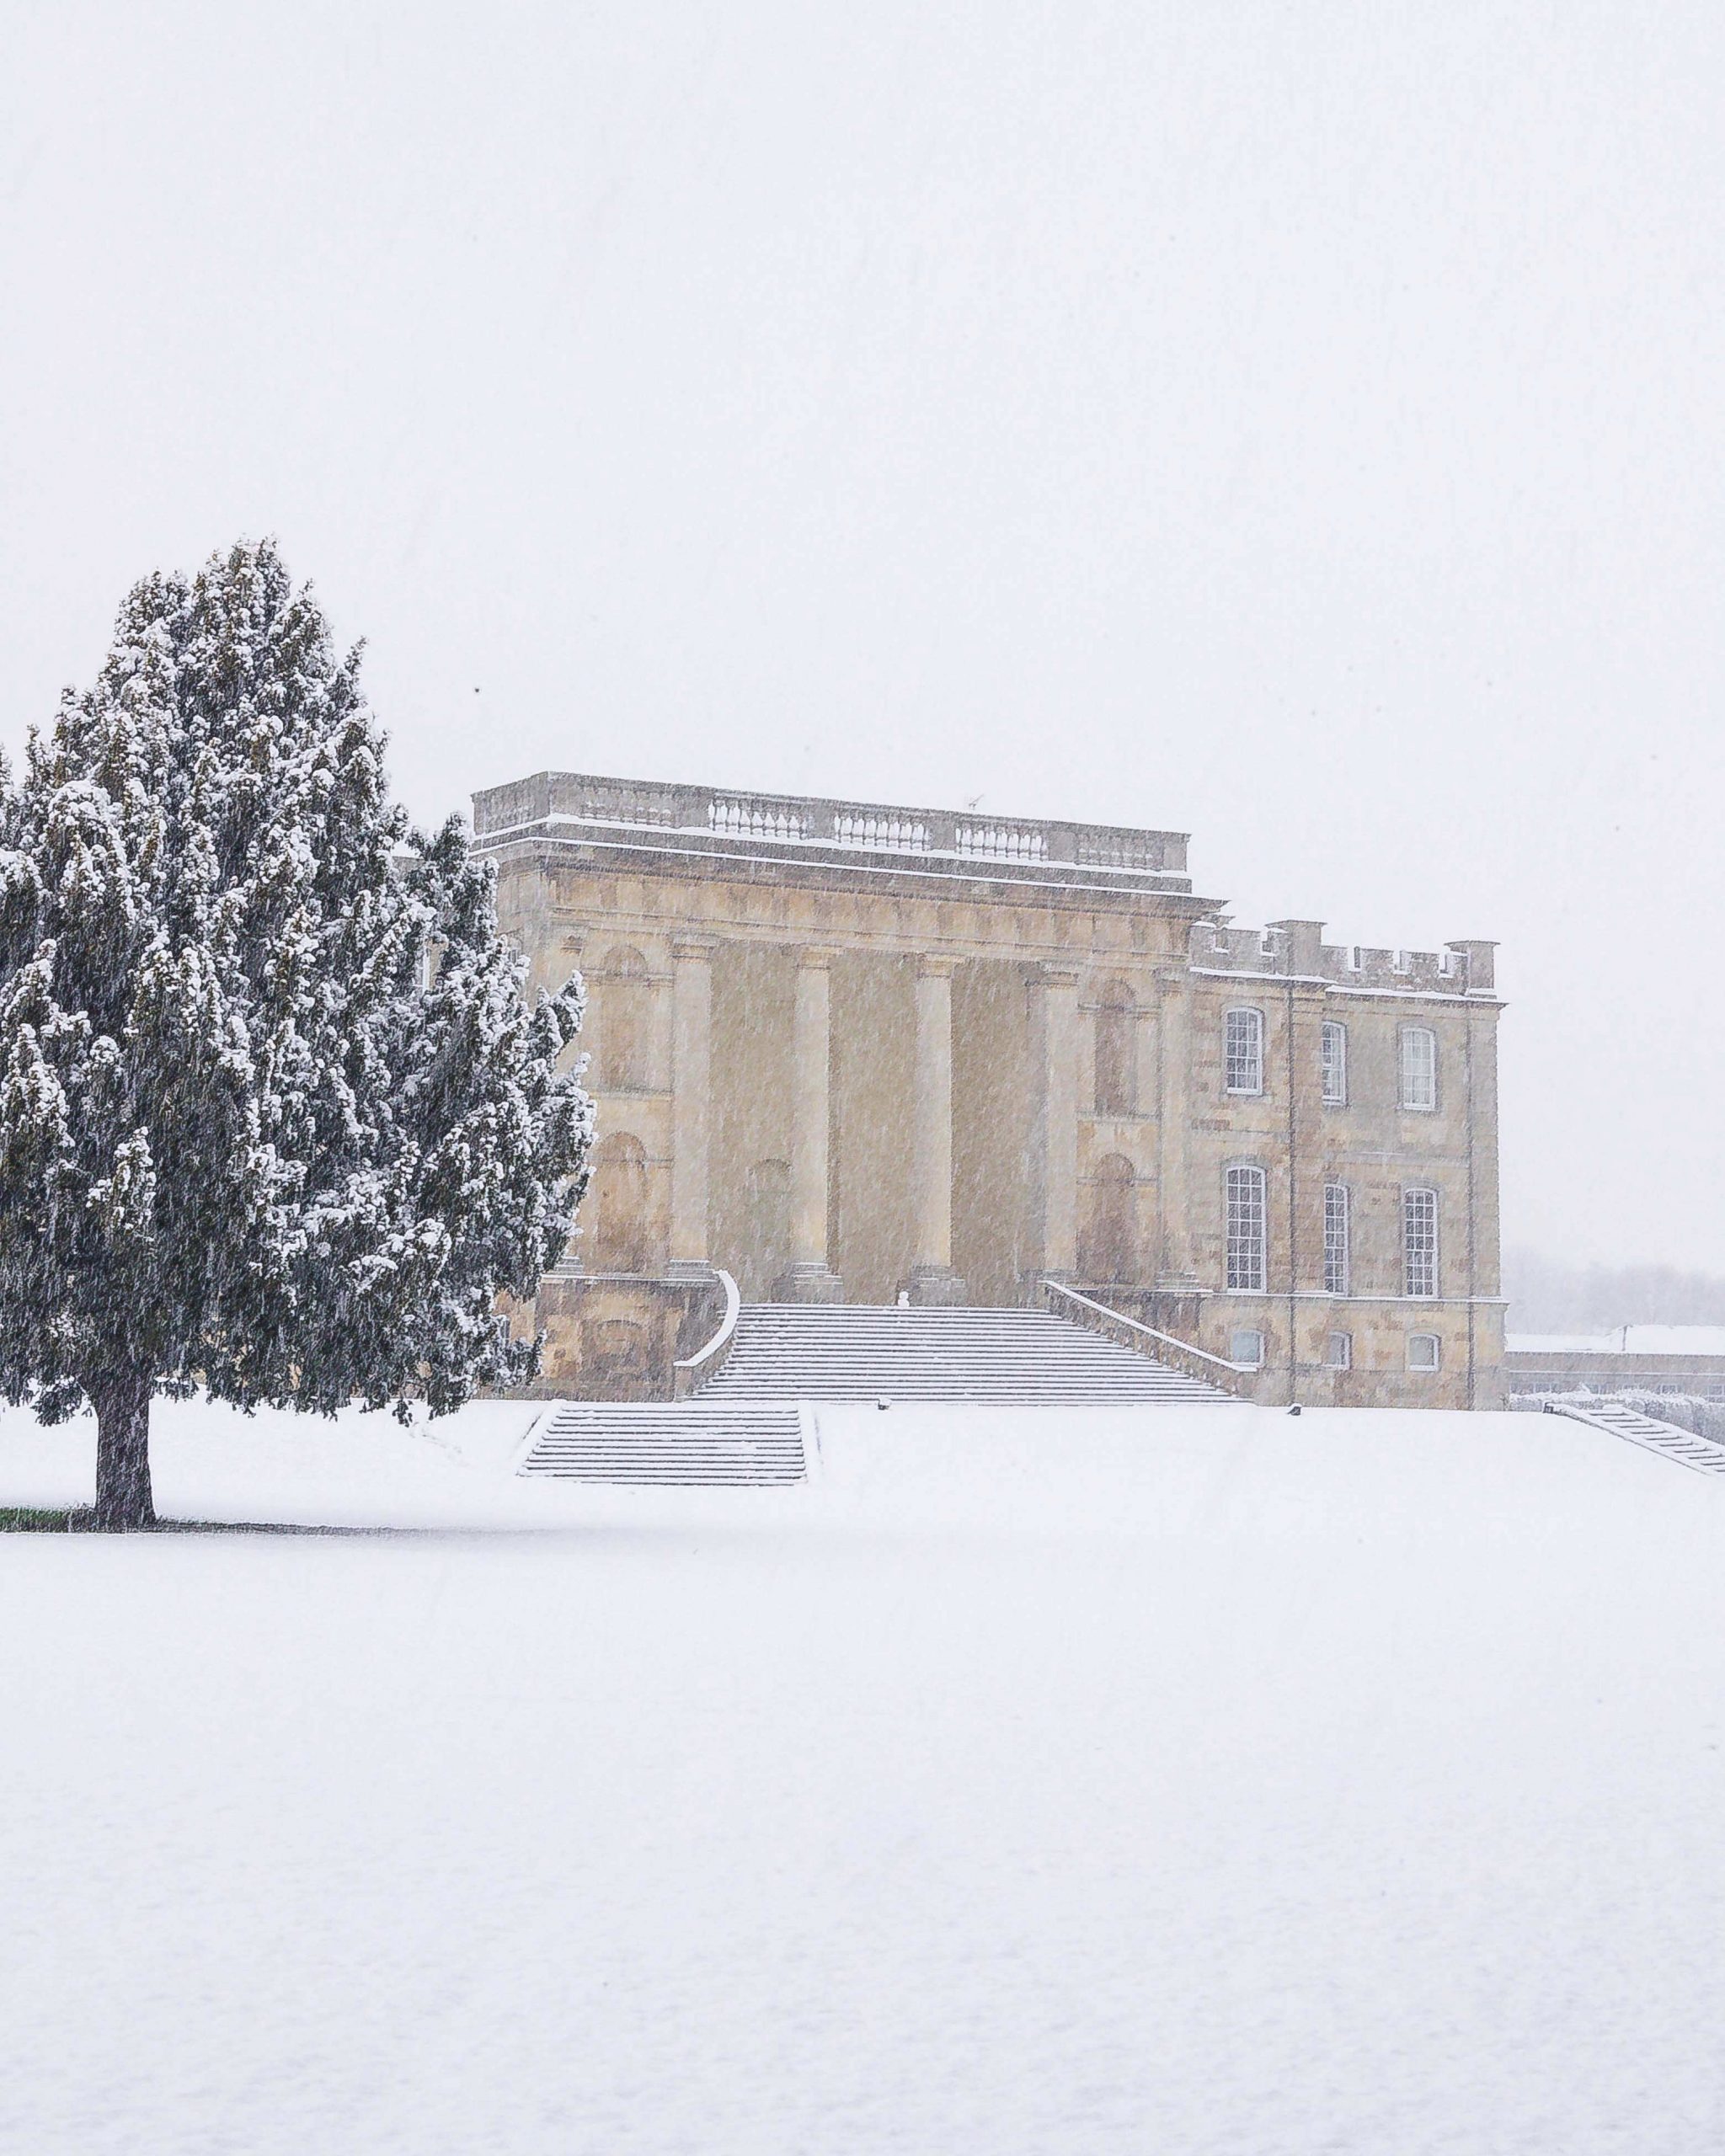 Photo of Kimbolton Castle in the snow.